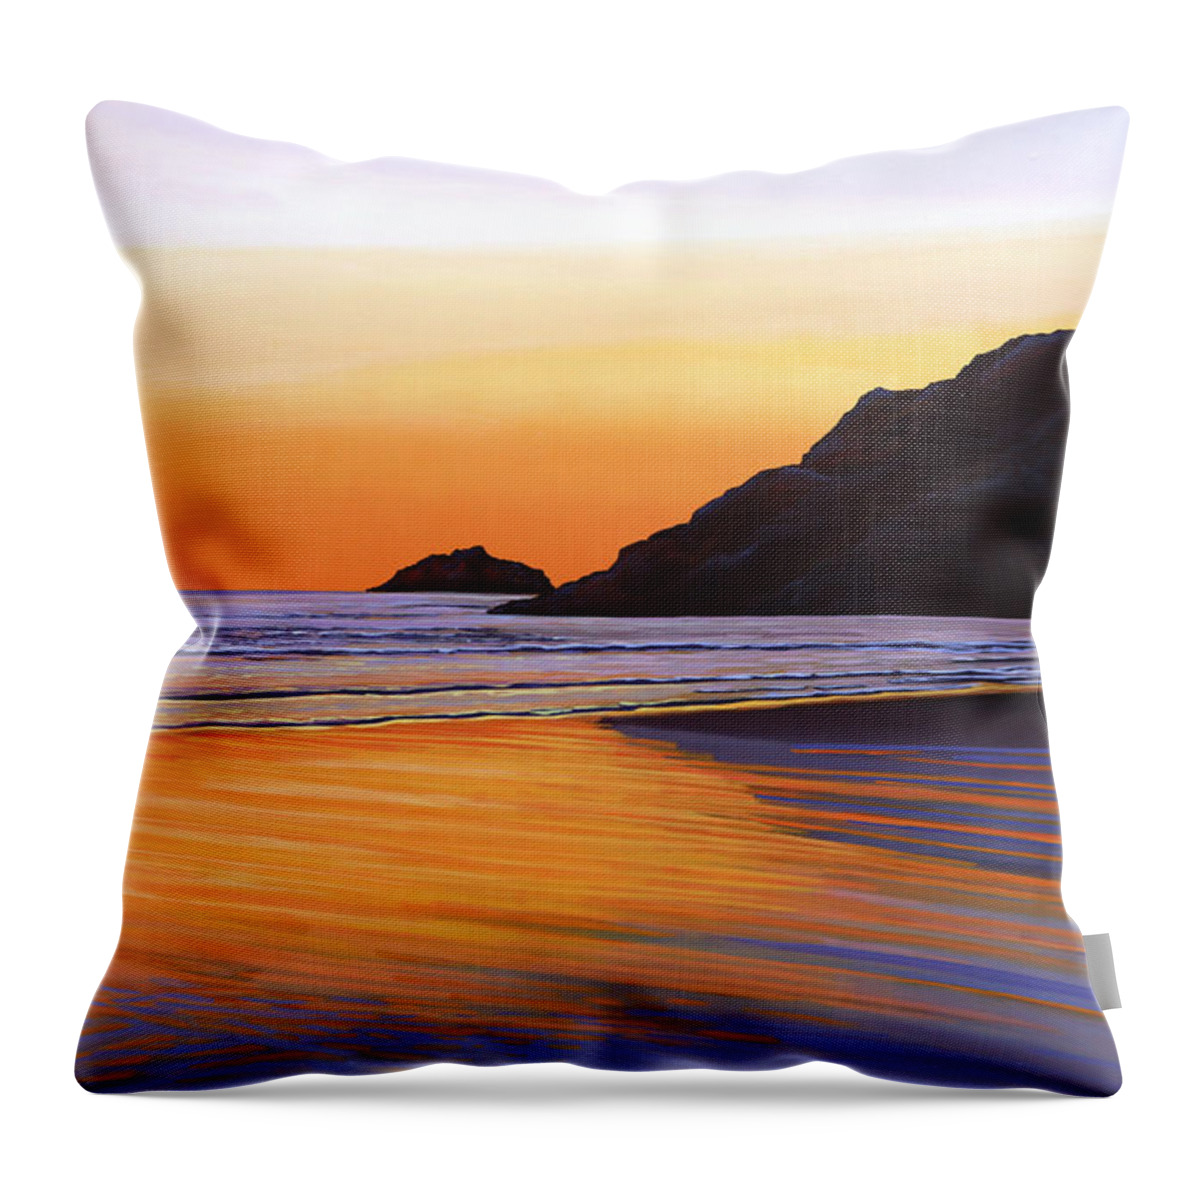 Sunset Throw Pillow featuring the painting Earth Sunrise Sea by Paul Meijering